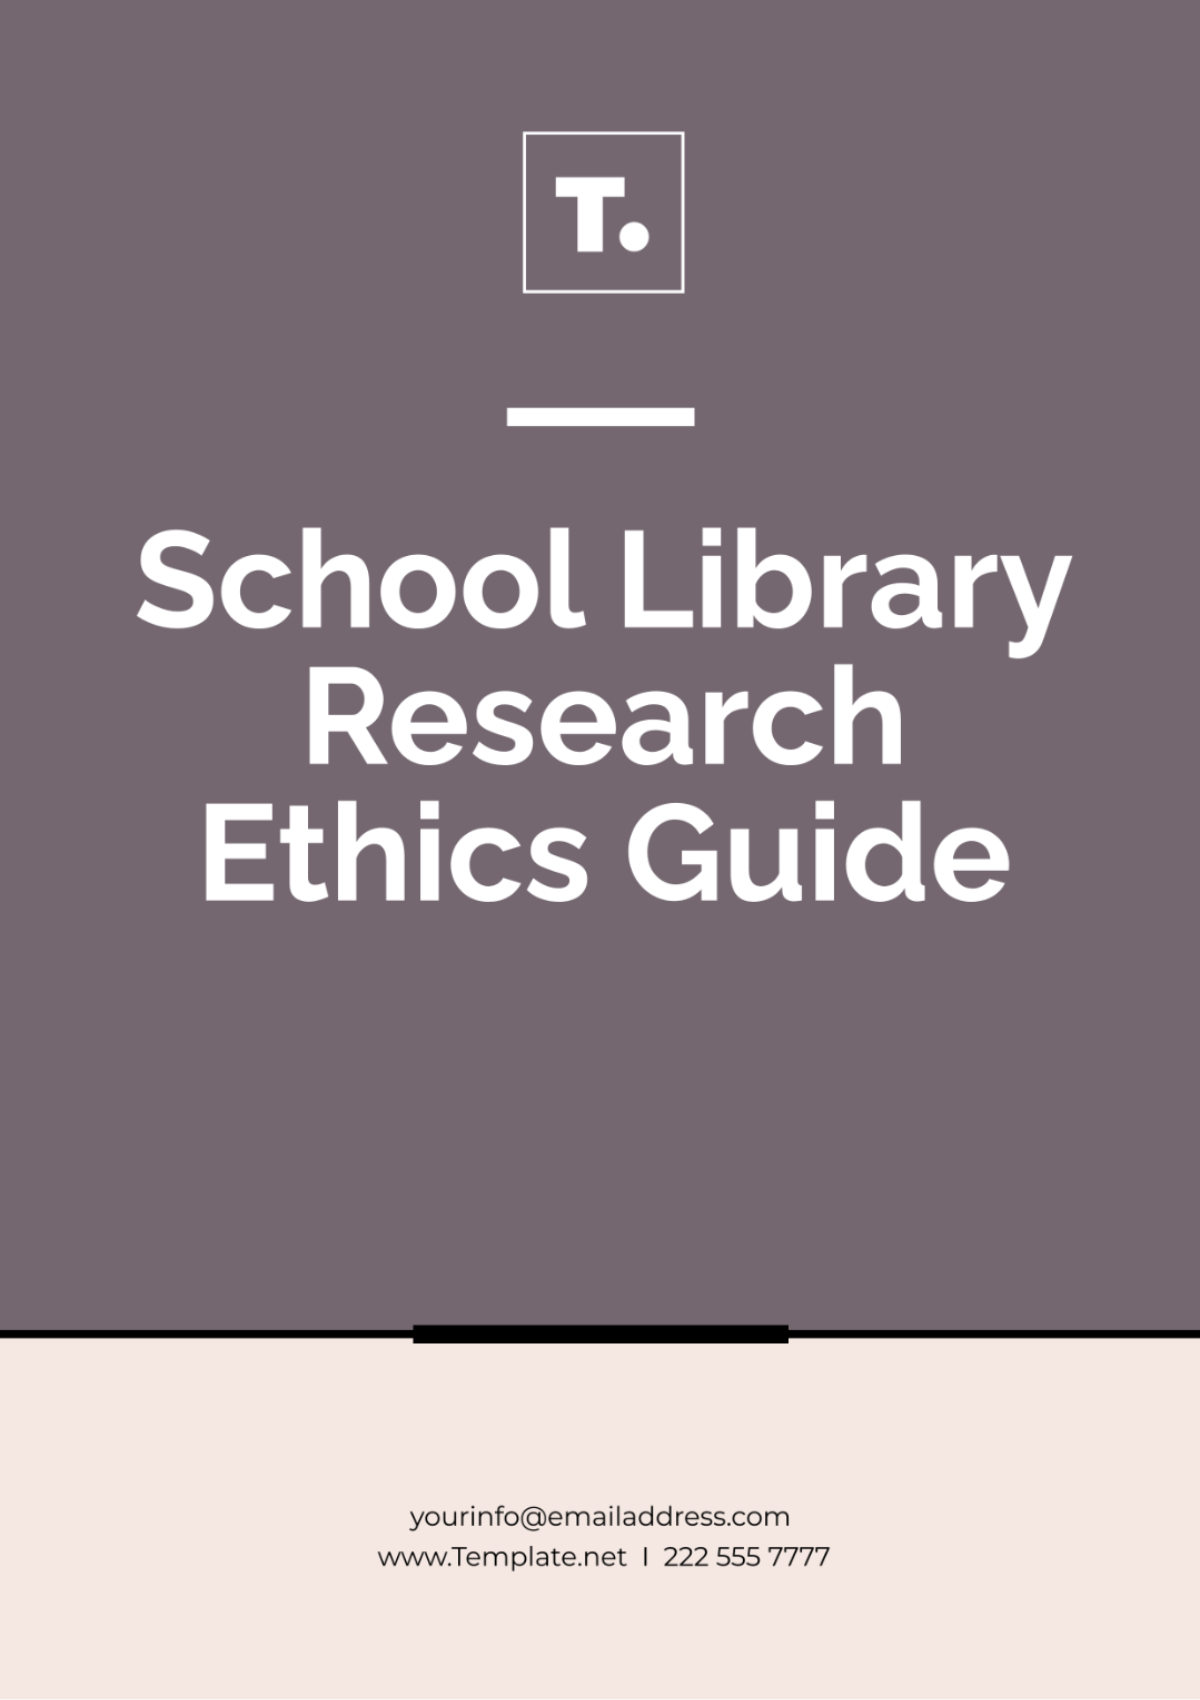 Free School Library Research Ethics Guide Template